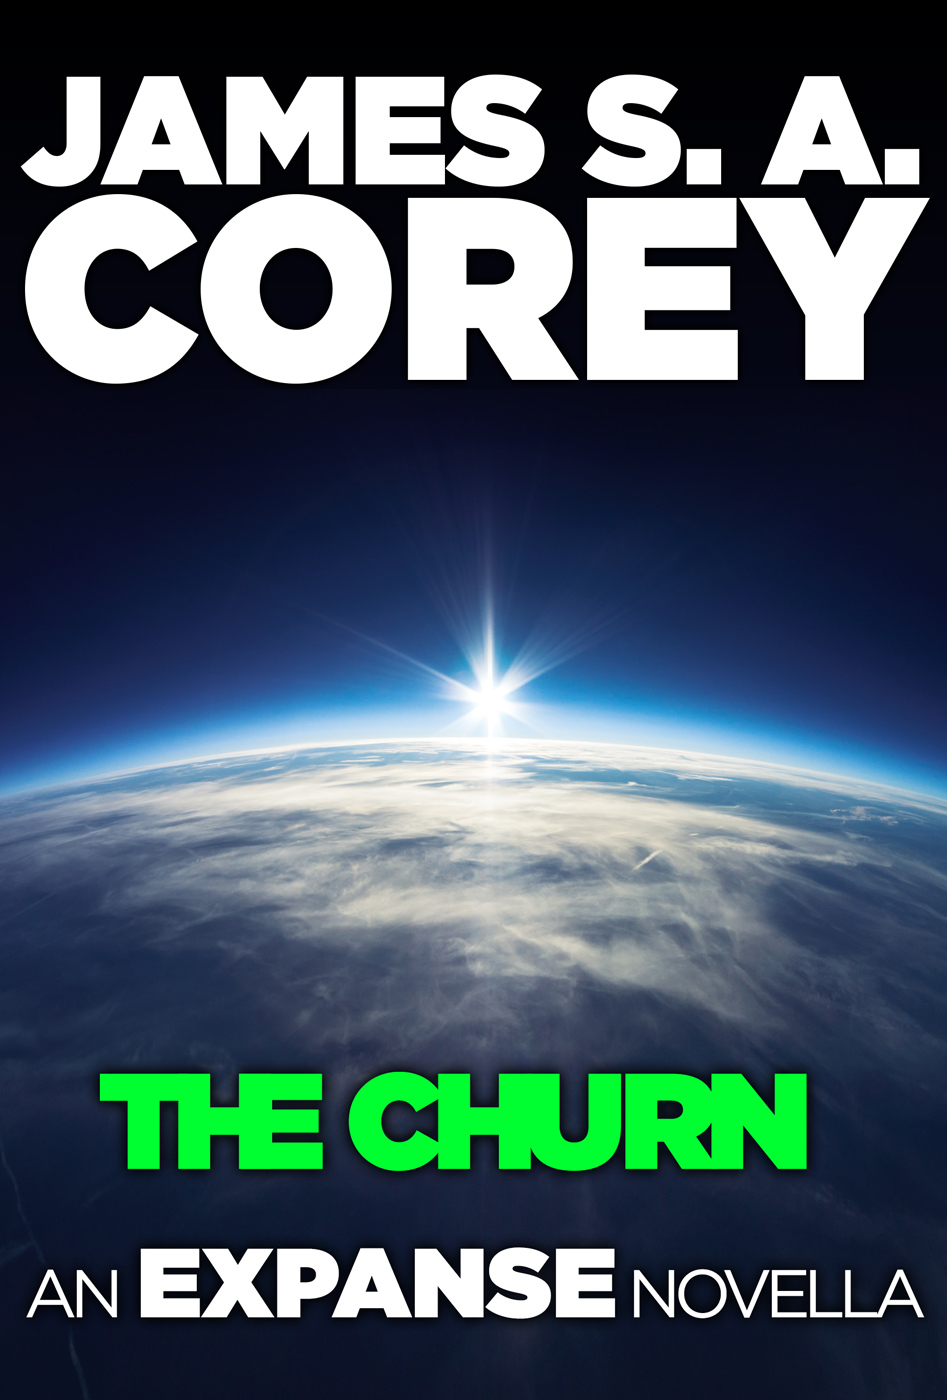 The Churn (2014) by James S.A. Corey